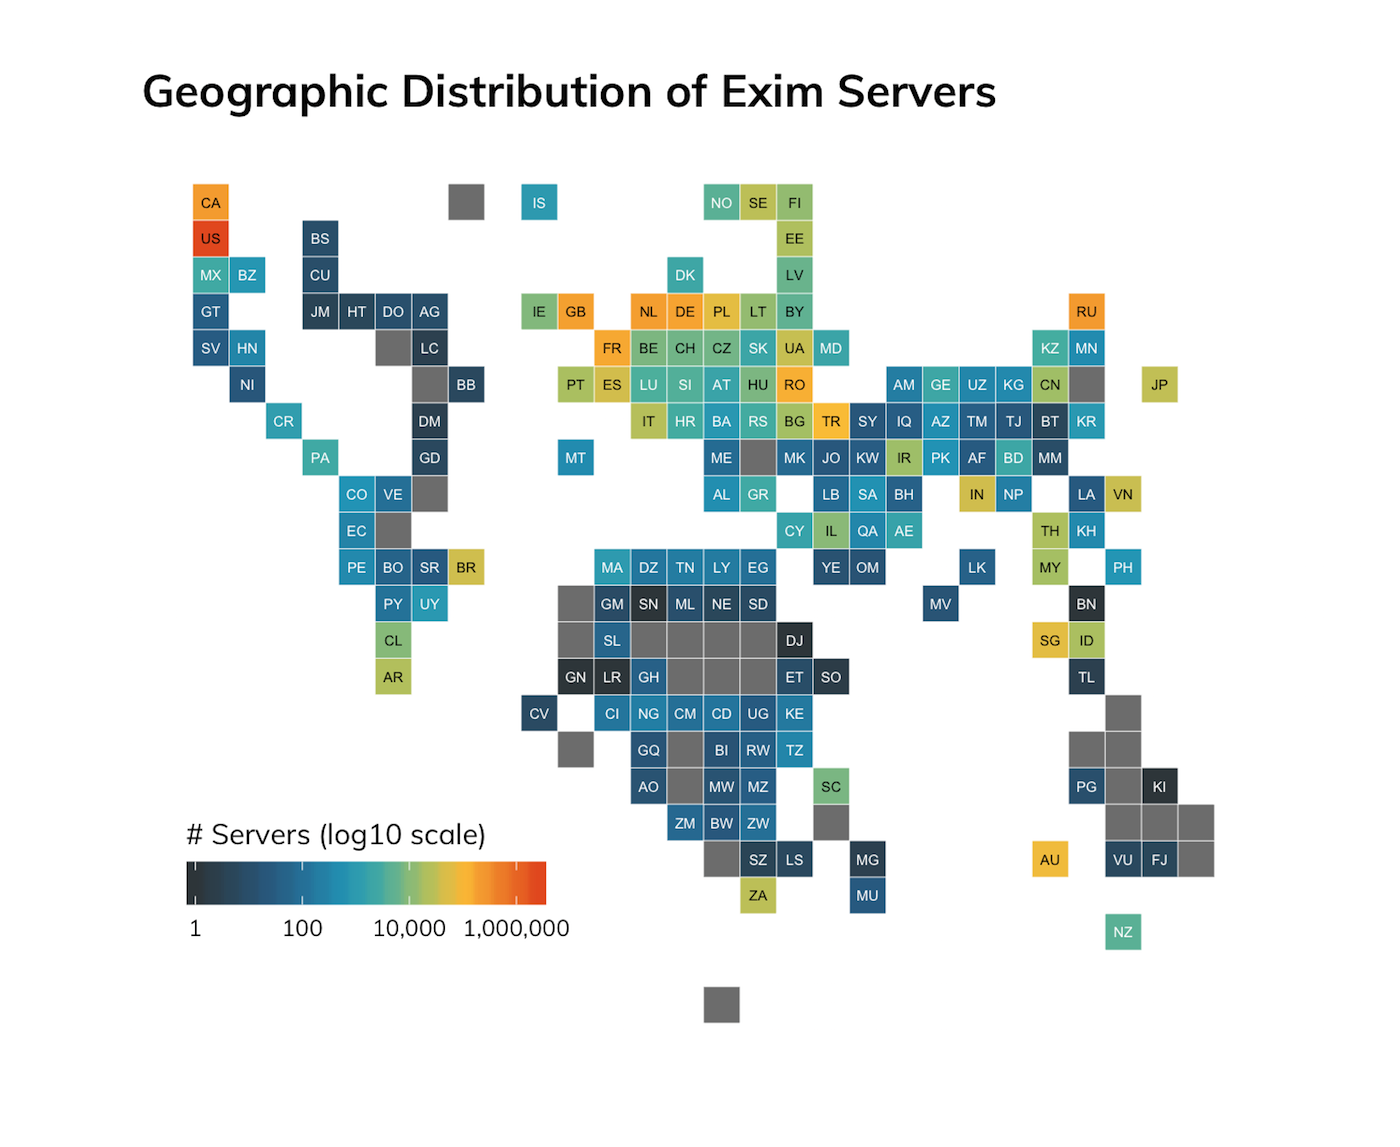 Geographic distribution of Exim servers across the world